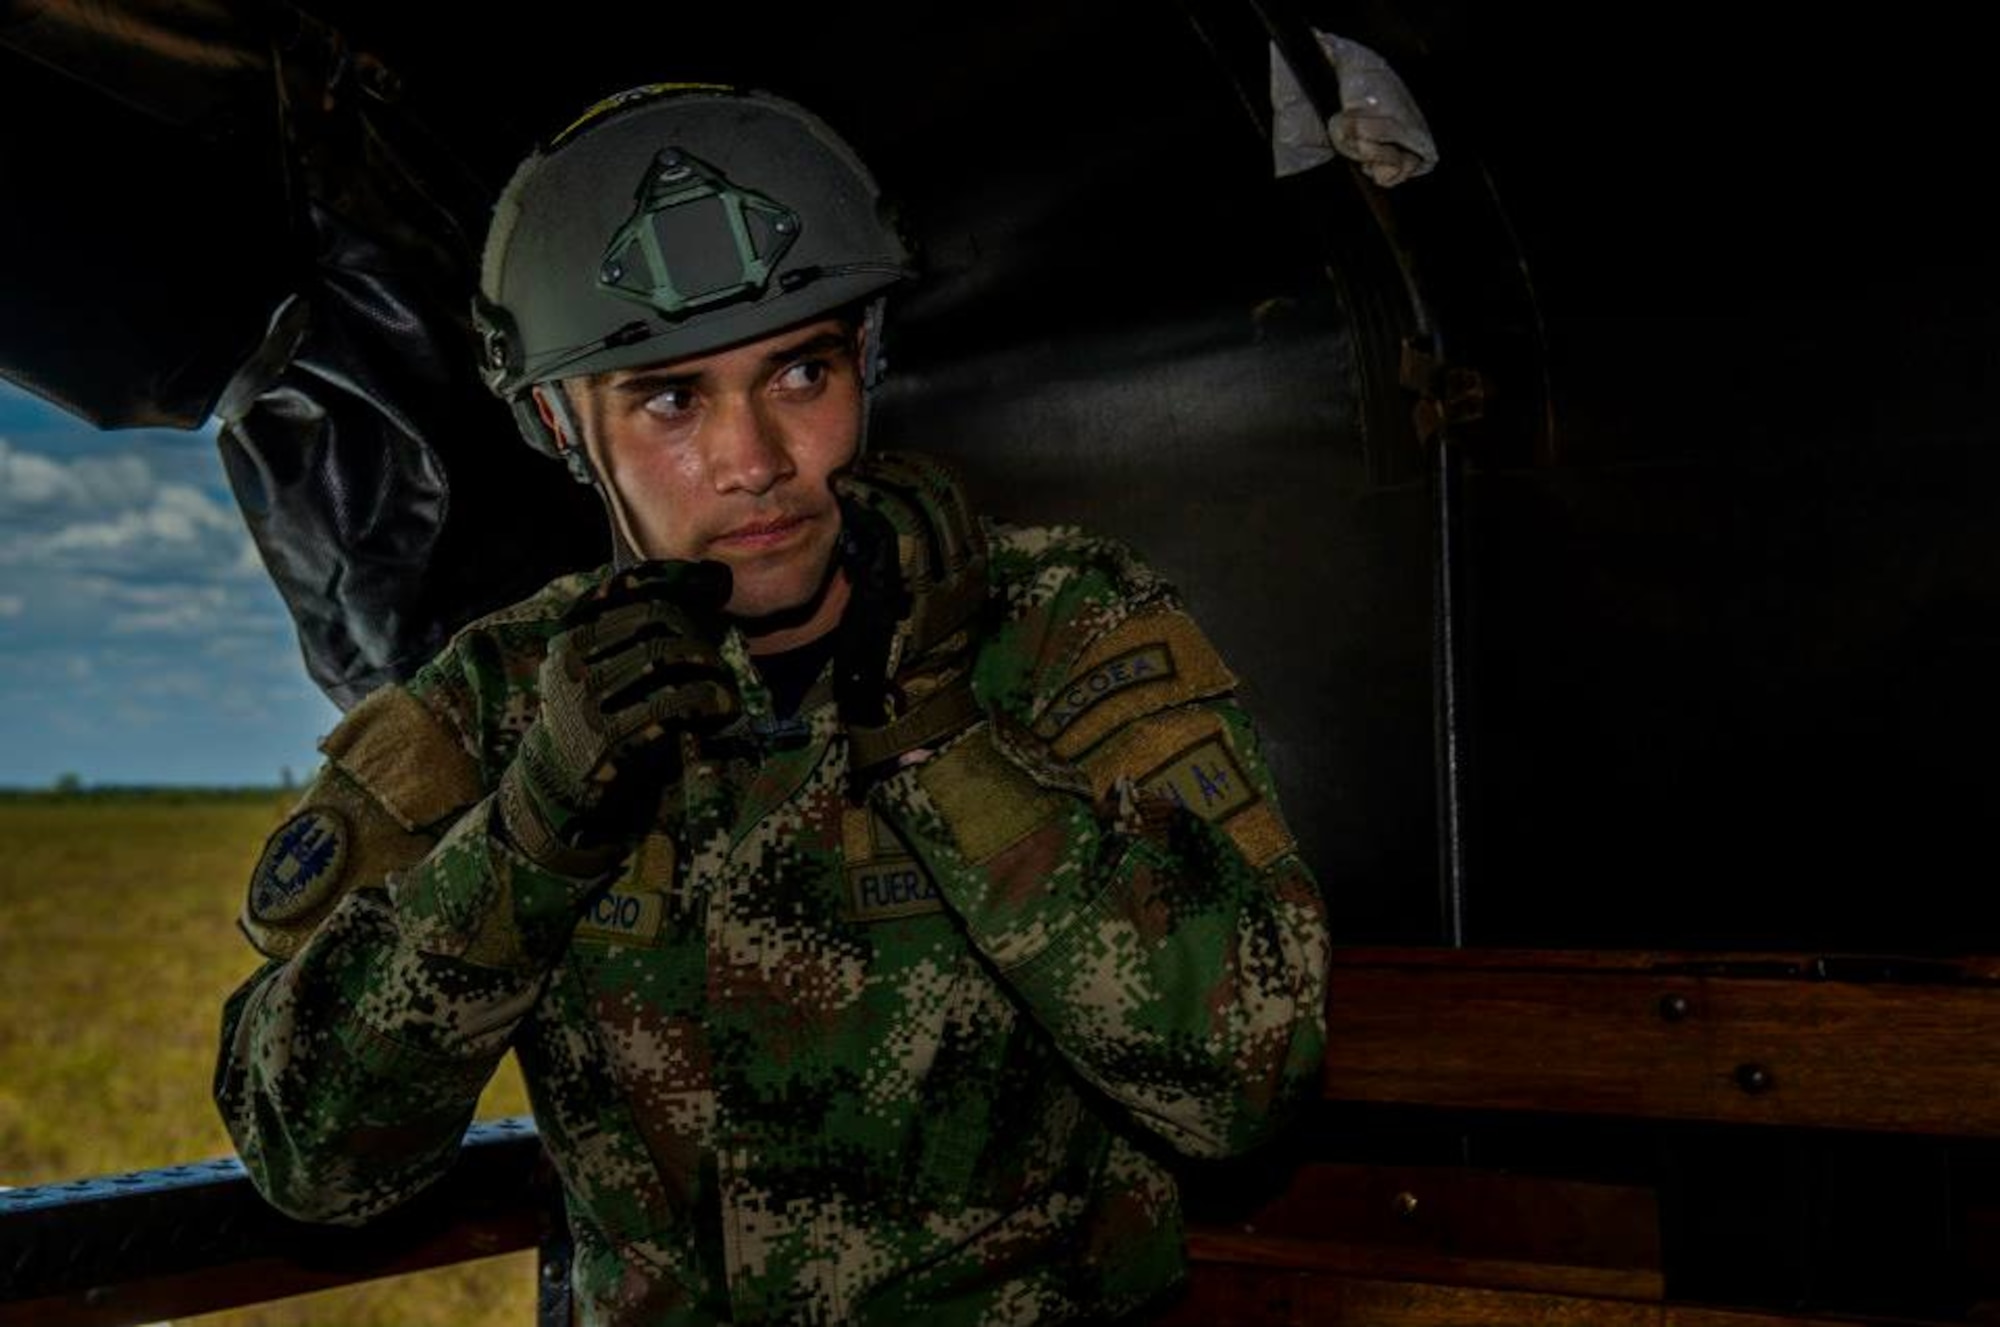 Tecnico Tercero Ramiro Roncancio, a Colombian Air Force Riggers, is recovered from a field after a parachute landing from a Colombian Air Force Casa 295 aircraft attempting to land as close to target during the first air drop with United States Air Force personnel aboard on March 3, 2015 at Marandua Air Force Base in Colombia, South America. (Photo by U.S. Air Force Tech. Sgt. Matthew Hannen)